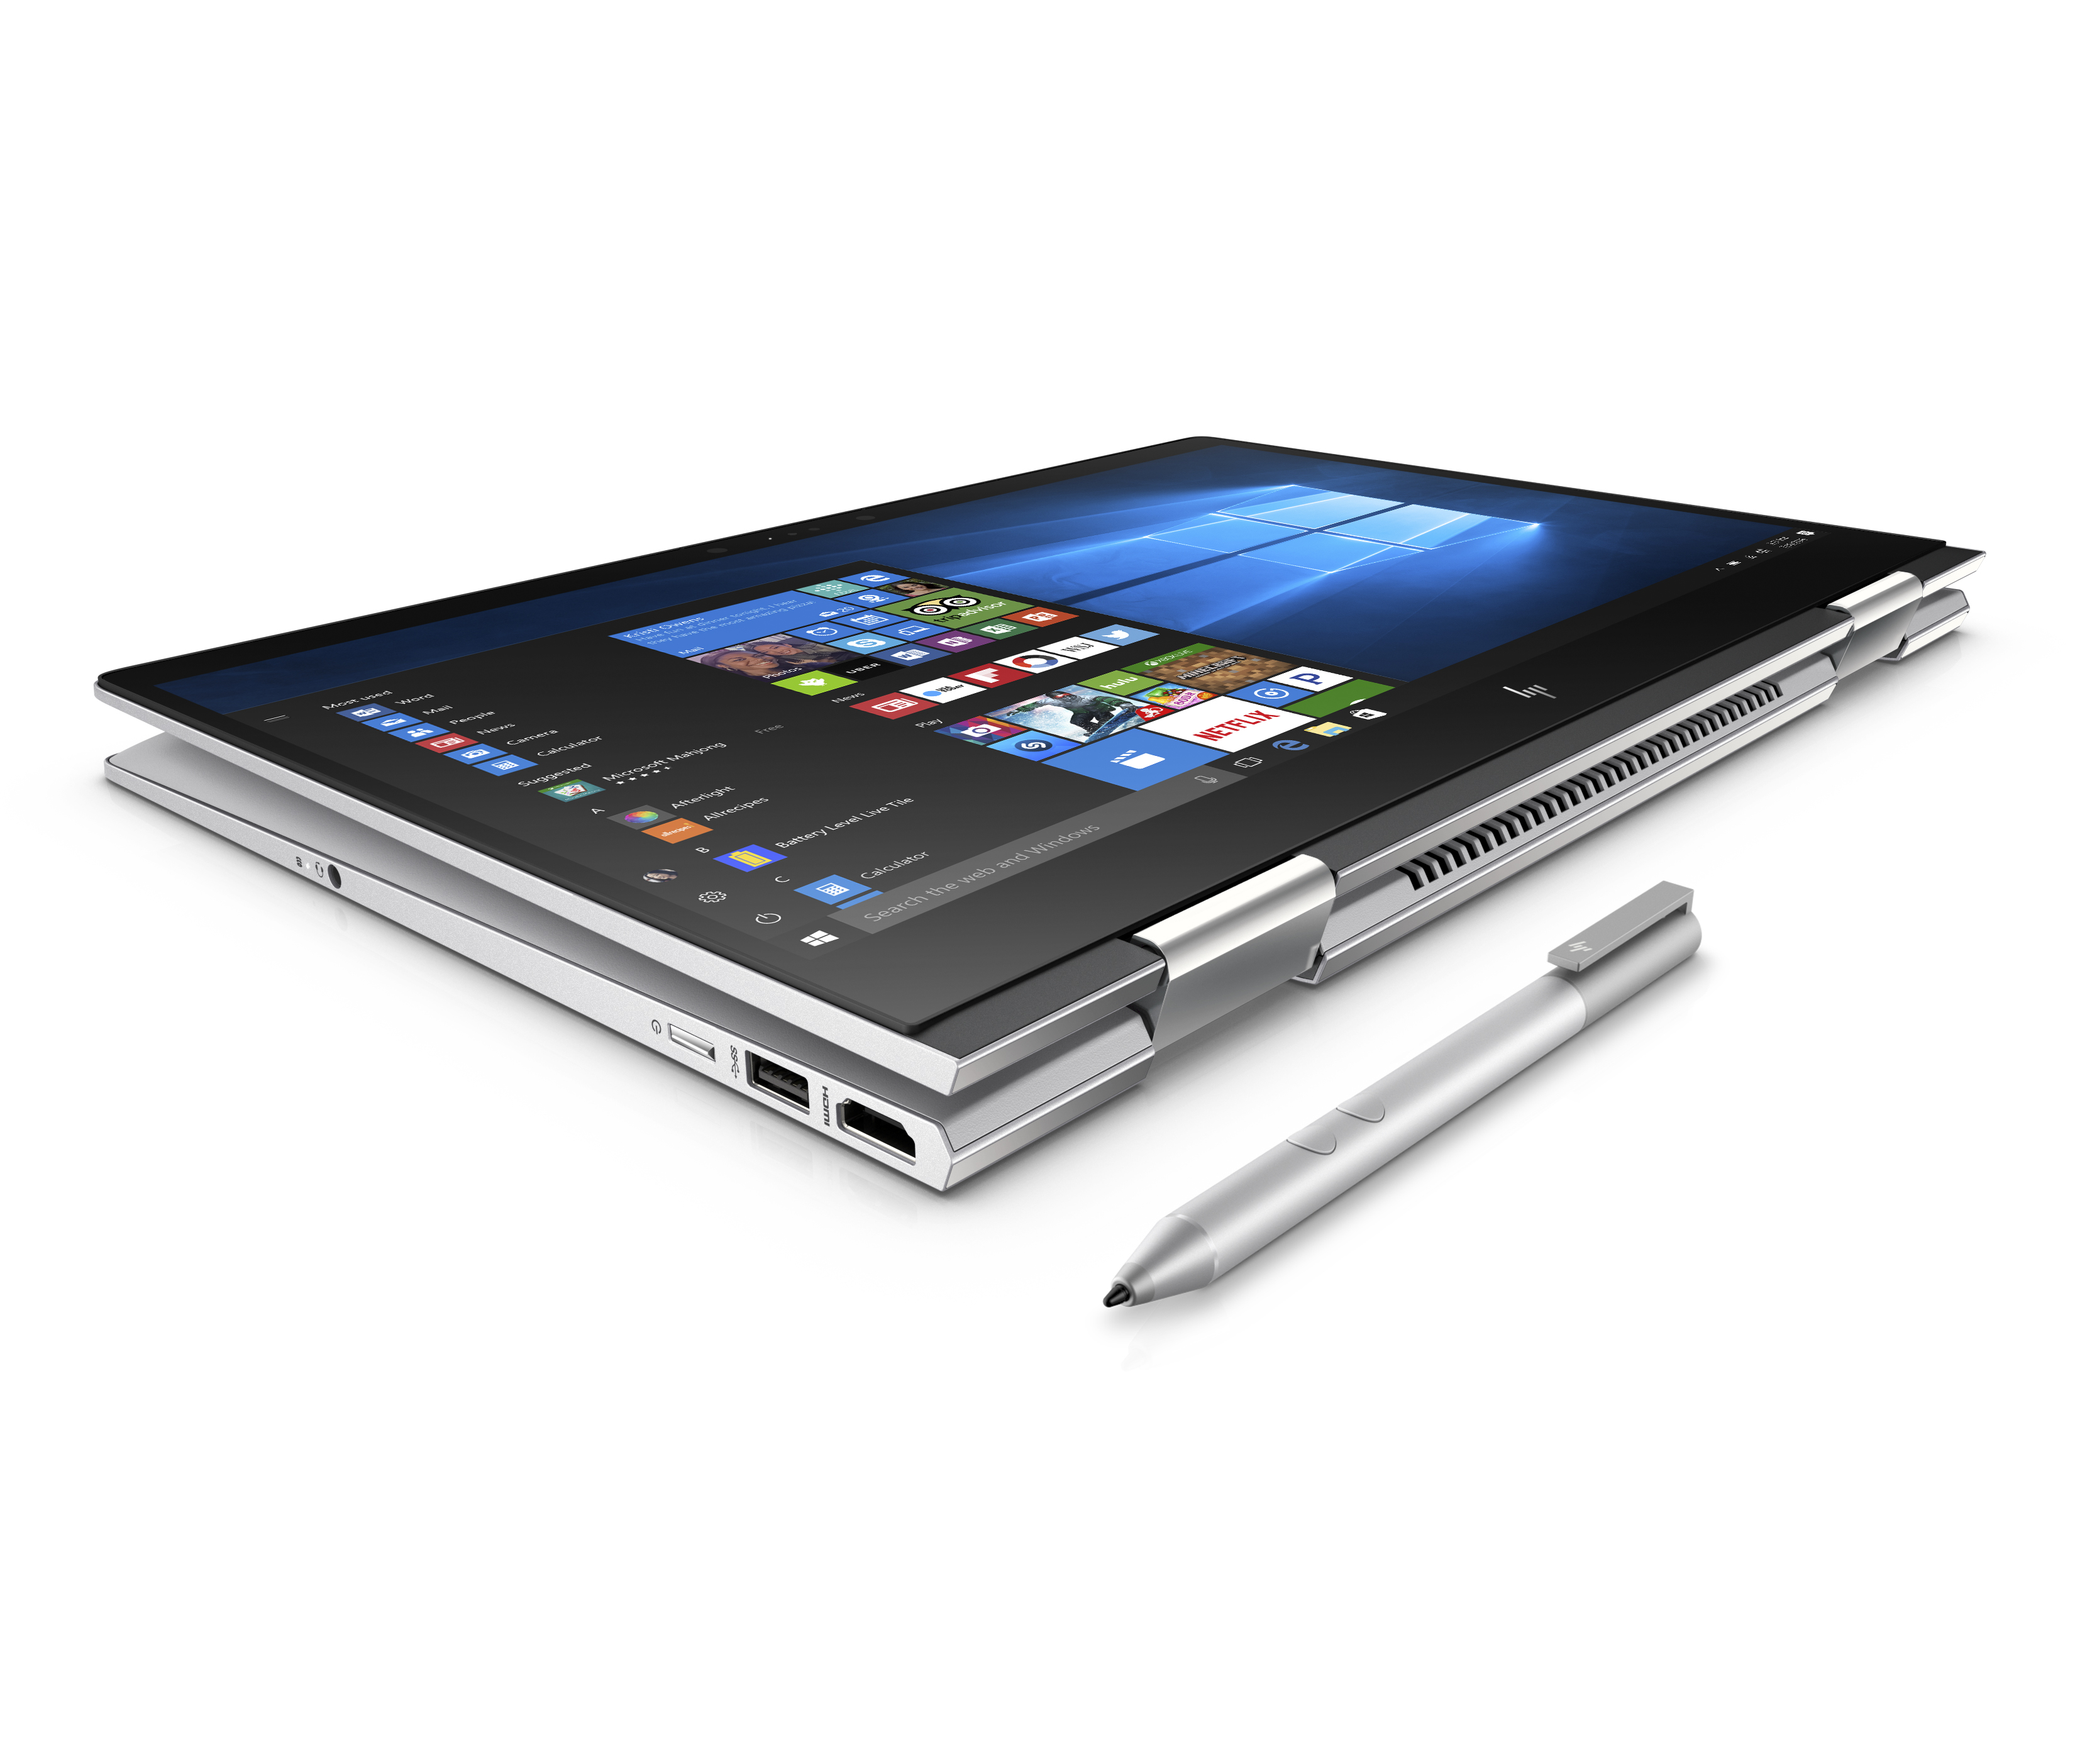 HP ENVY x360 with Windows 10